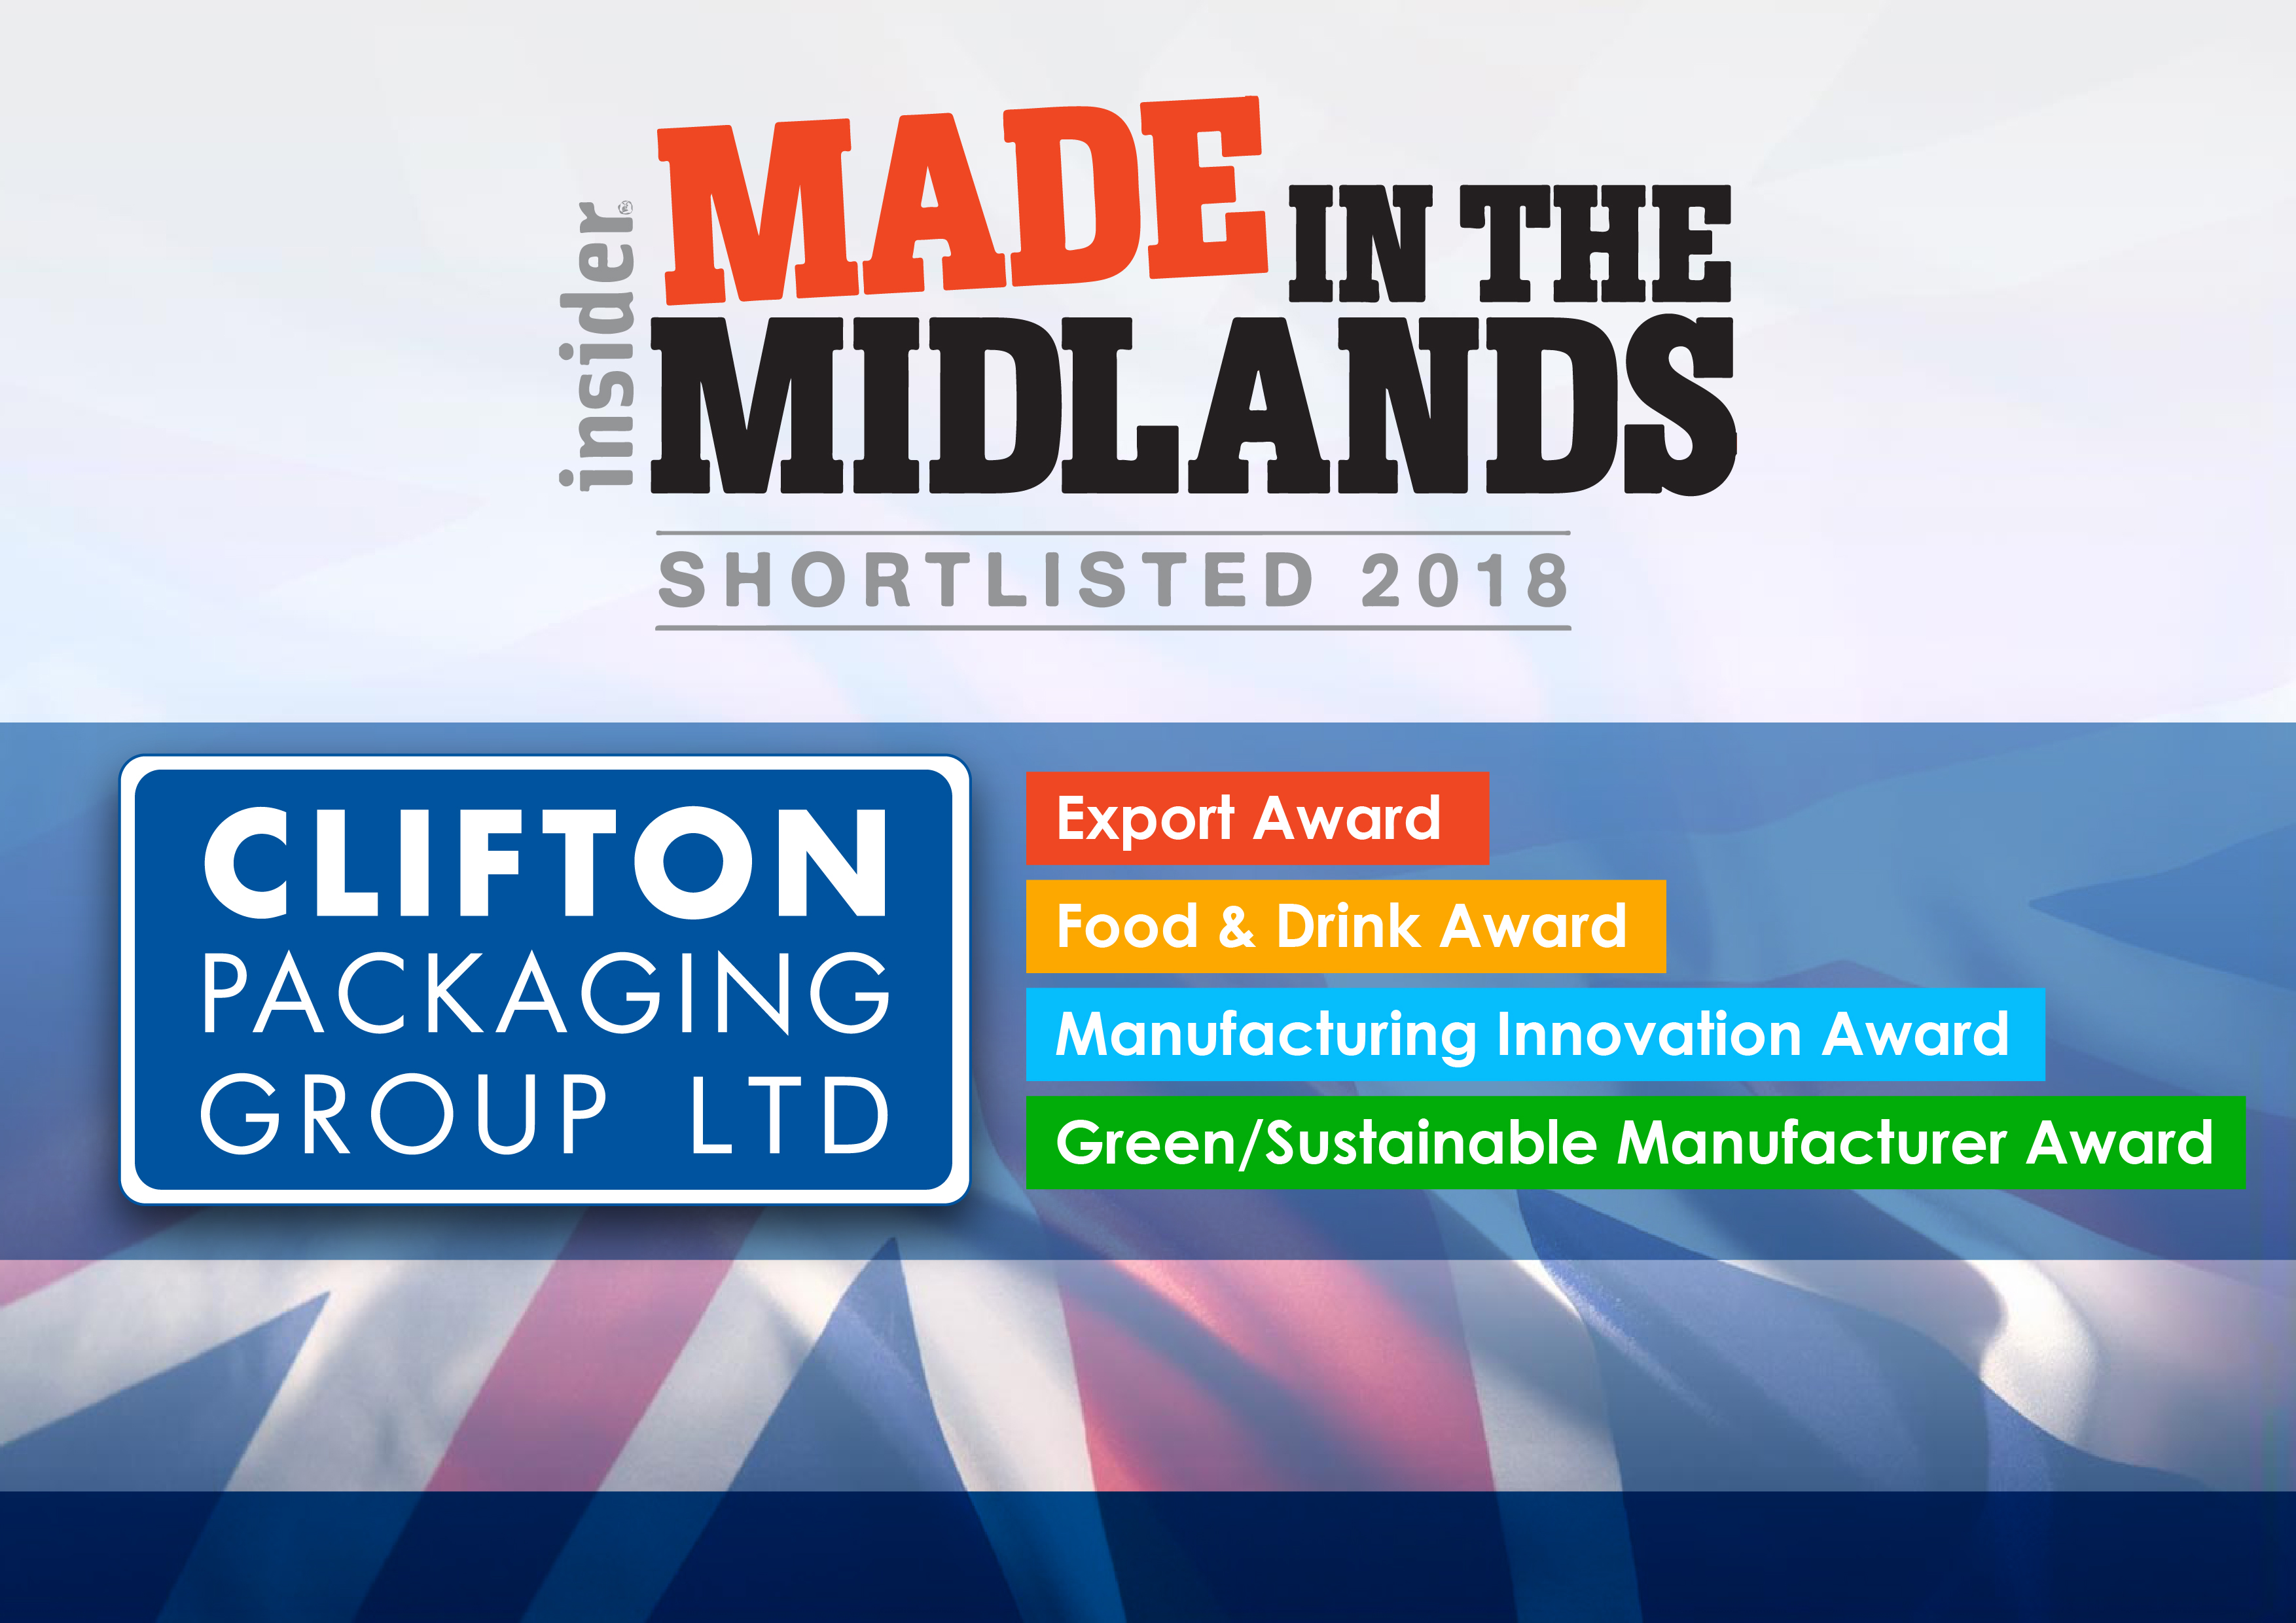 insider Made in the Midlands 2018 - Shortlisted 2018